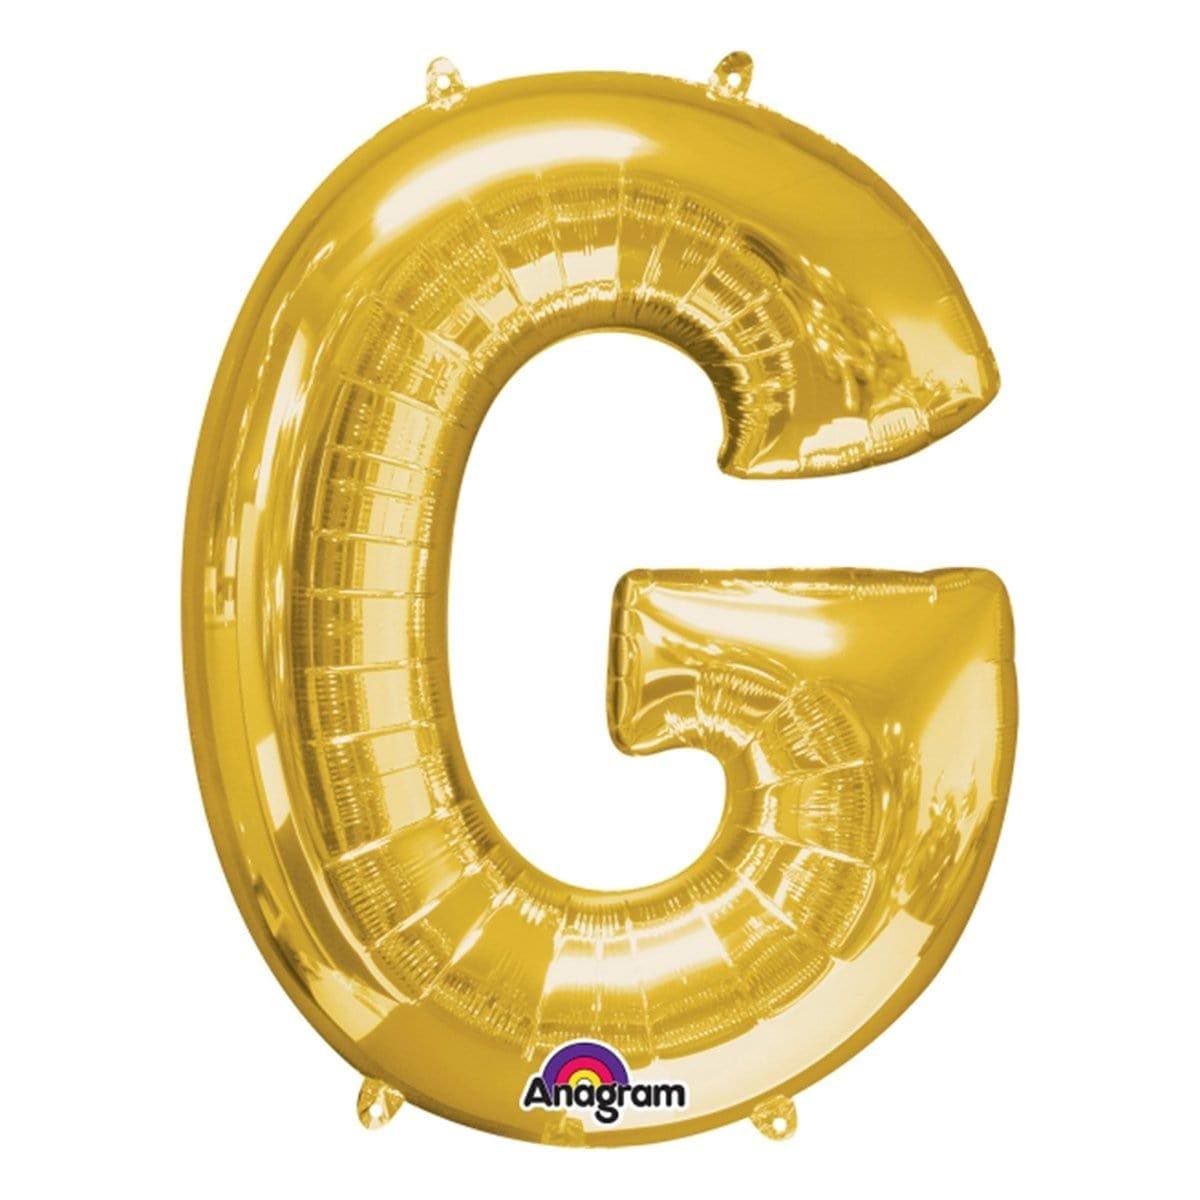 Buy Balloons Gold Letter G Foil Balloon, 16 Inches sold at Party Expert